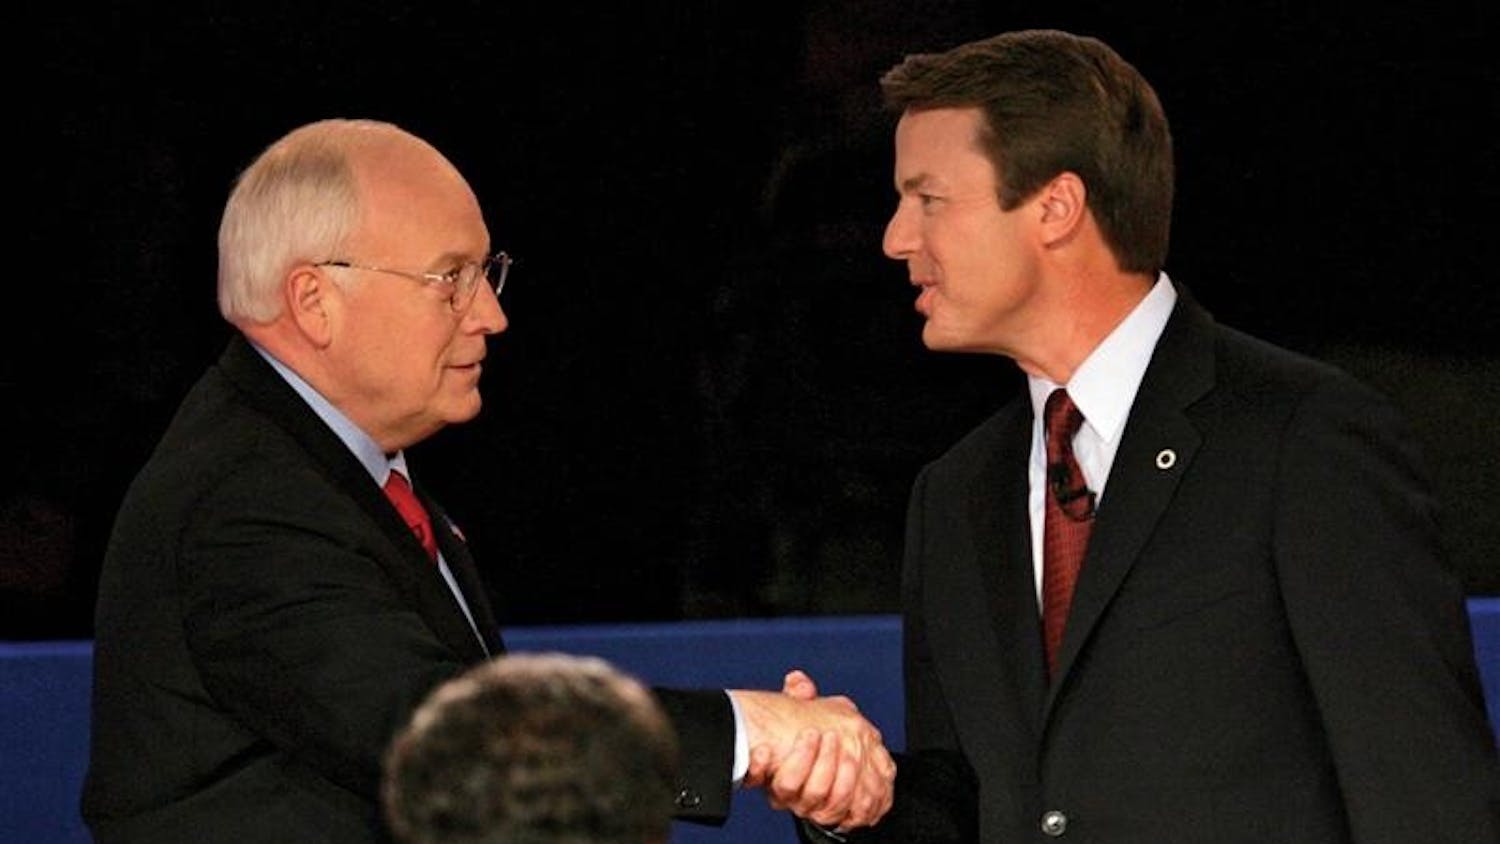 Vice President Dick Cheney and Democratic vice presidential candidate John Edwards shake hands before their vice presidential debate at Case Western Reserve University on Oct. 5, 2004 in Cleveland on Tuesday. In the foreground is moderator Gwen Ifill.